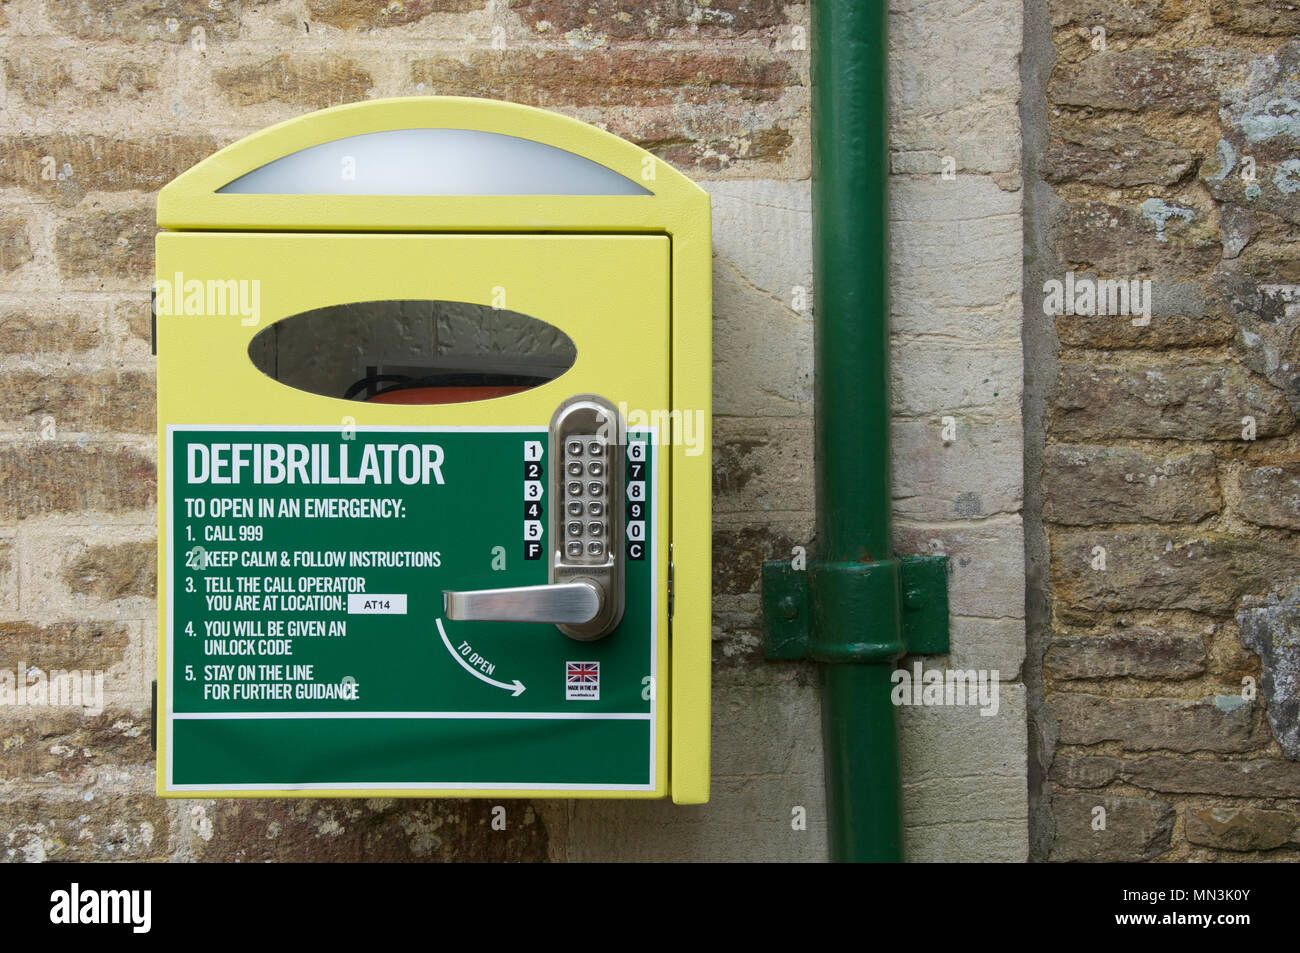 Automated external defibrillator (AED). Emergency life saving medical equipment in a wall mounted cabinet located in a rural Dorset village. England. Stock Photo